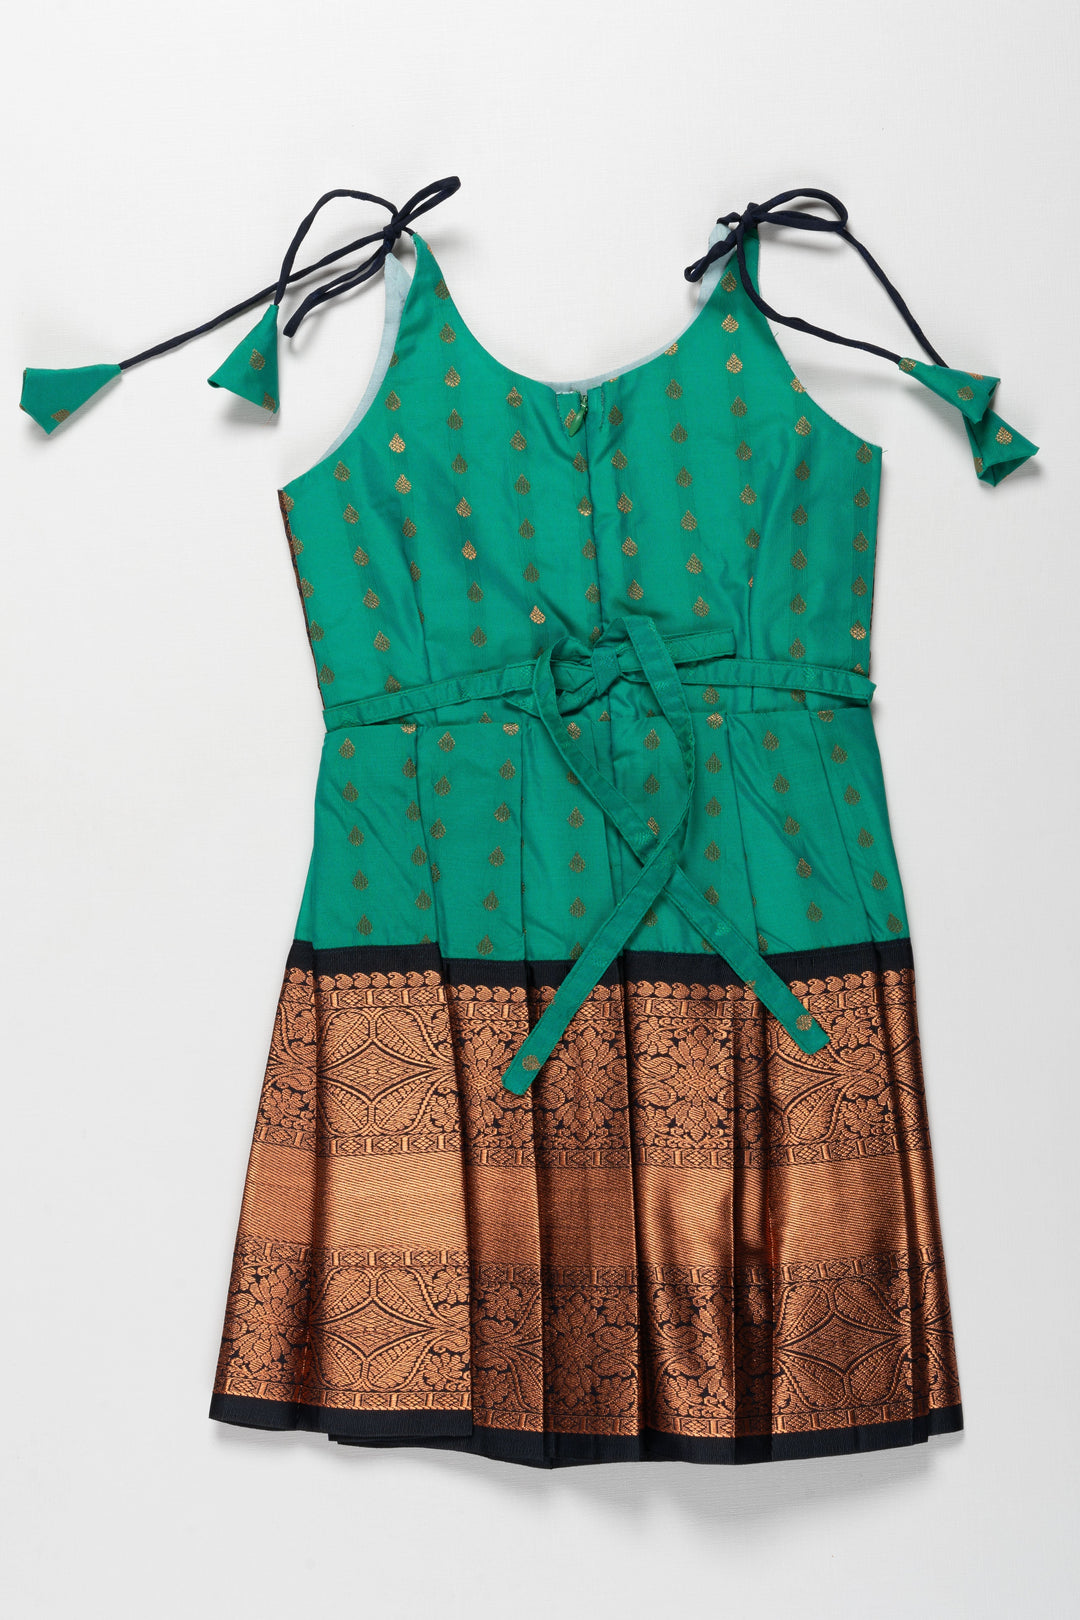 The Nesavu Tie-up Frock Enchanting Green and Bronze Silk Knot-Tie Frock for Ayush Homam and Noolukettu: A Blend of Tradition Nesavu Chic Green and Bronze Silk Dresses for Girls | Elegant Party Wear with KnotTie Detail | The Nesavu